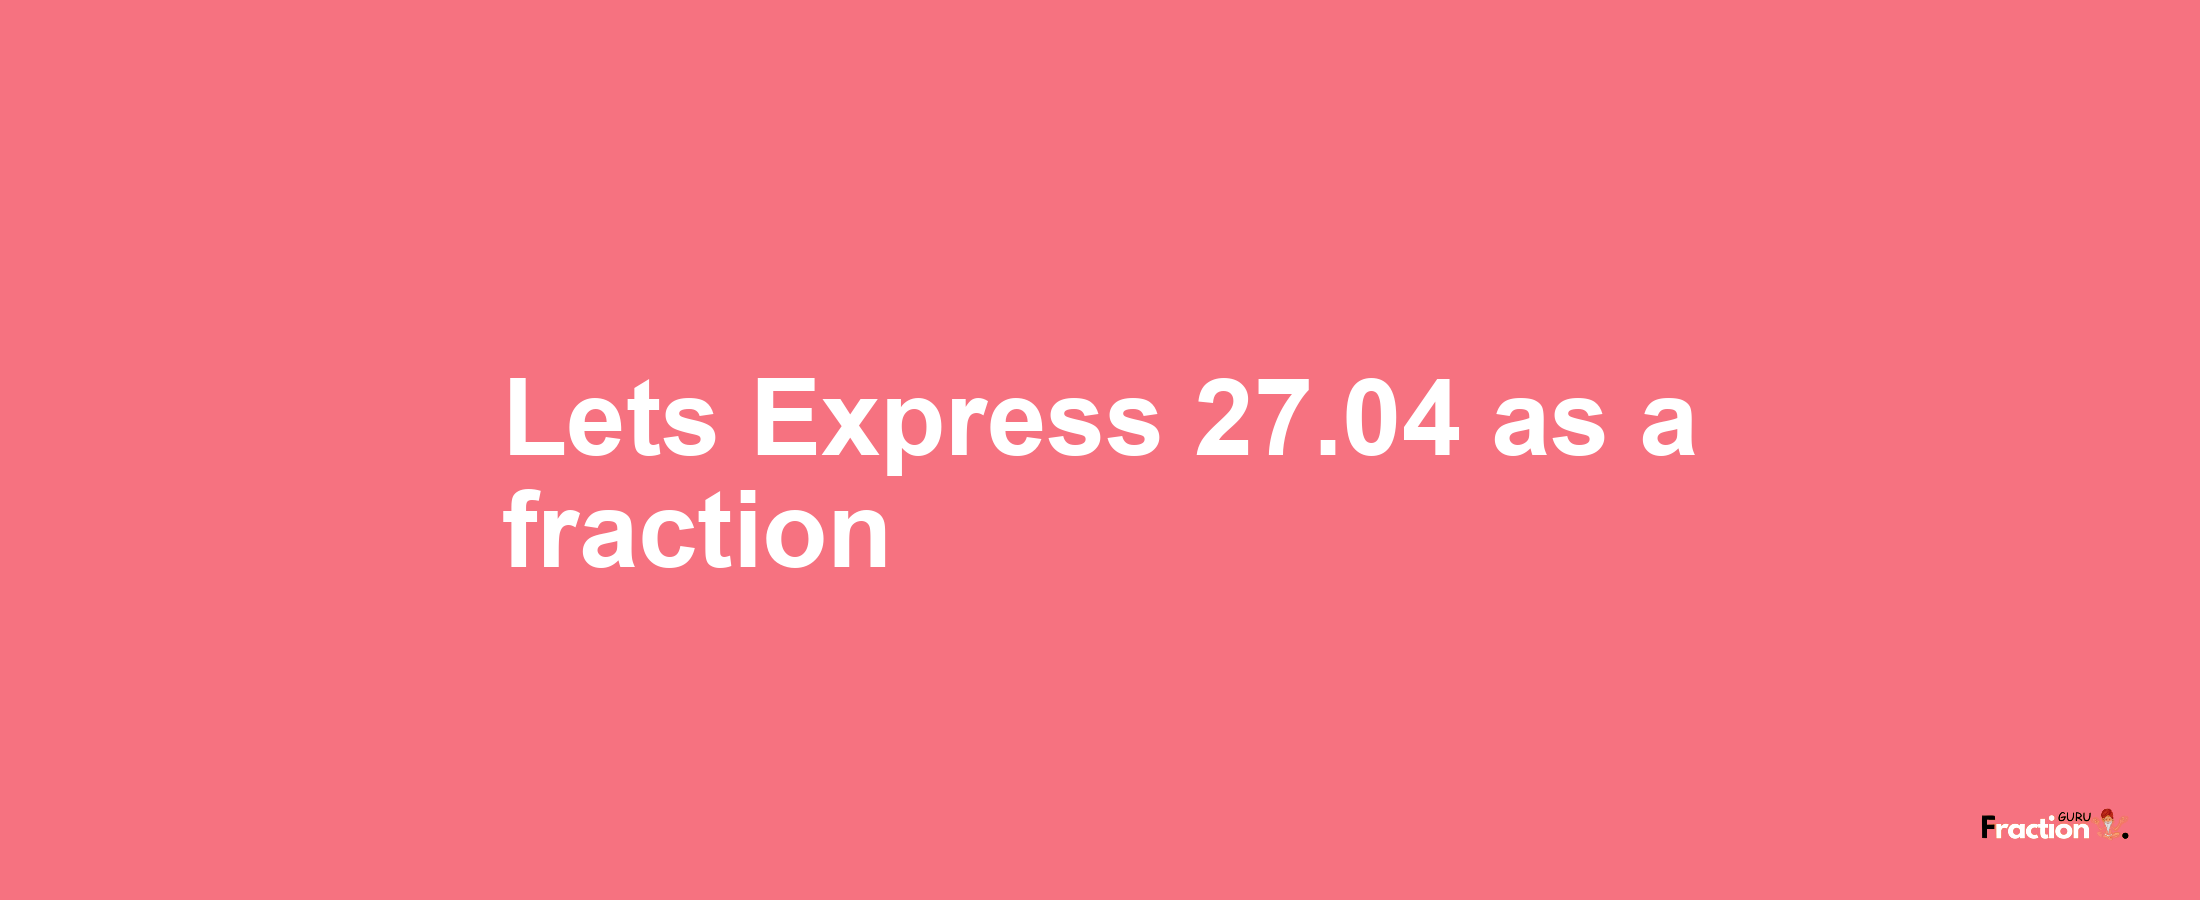 Lets Express 27.04 as afraction